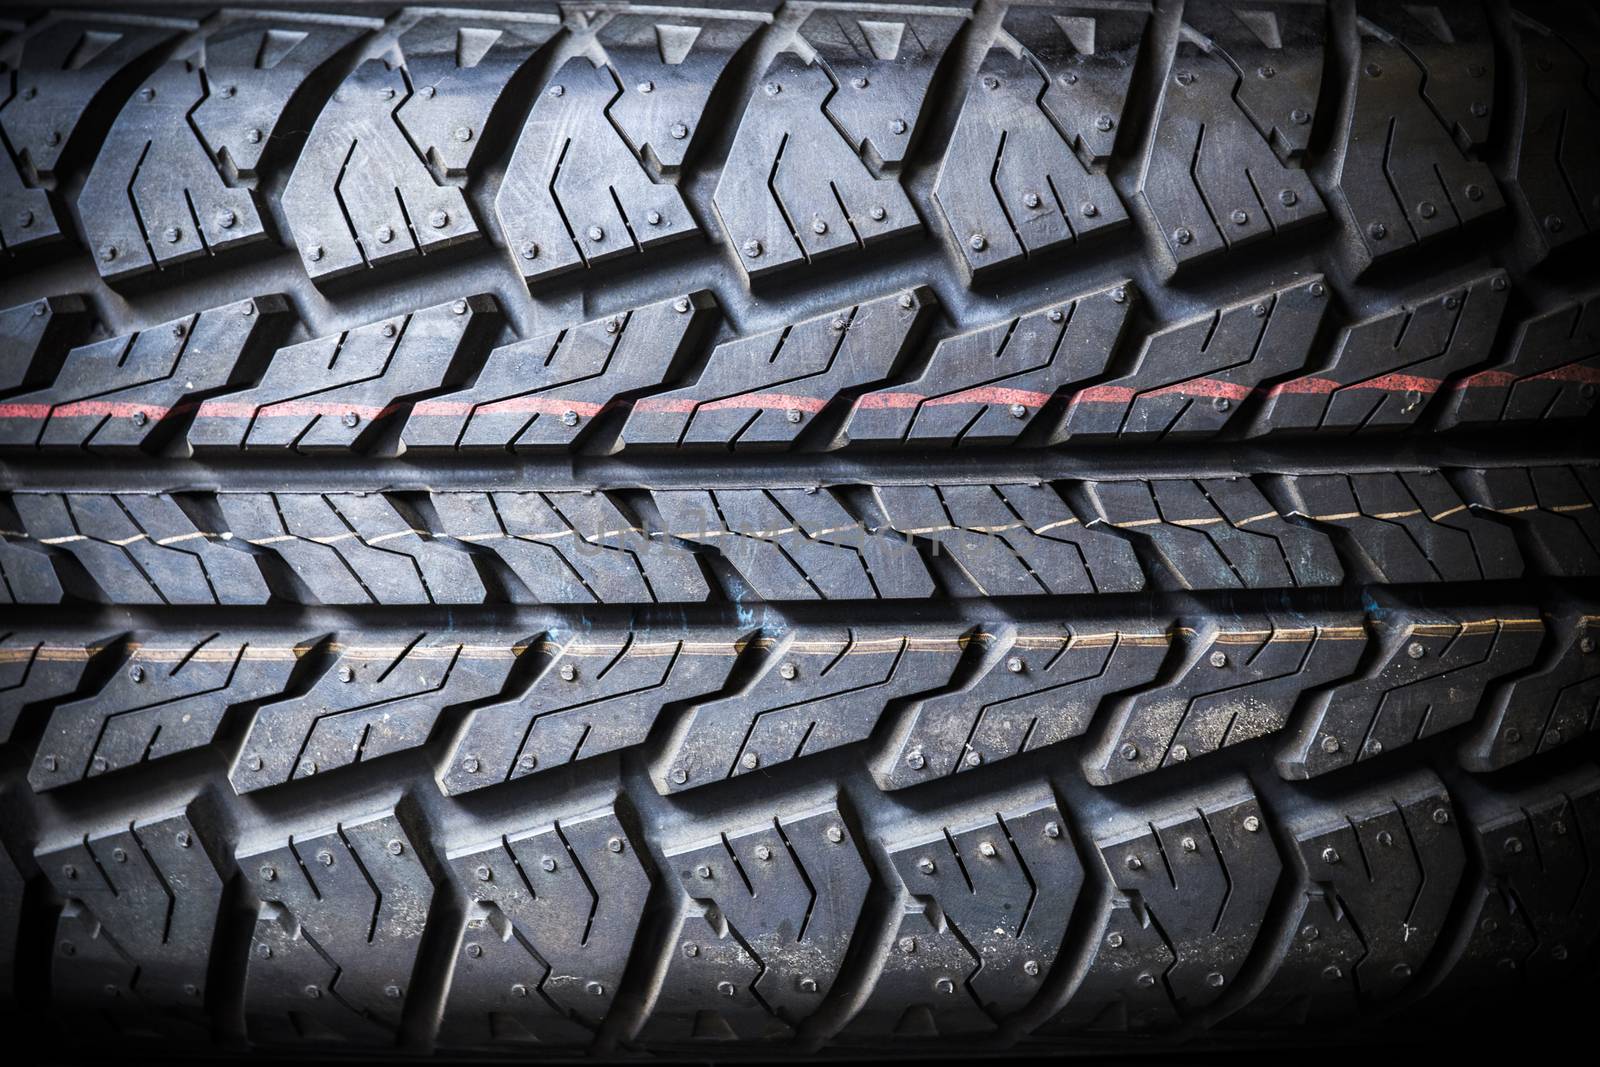 Tire background texture